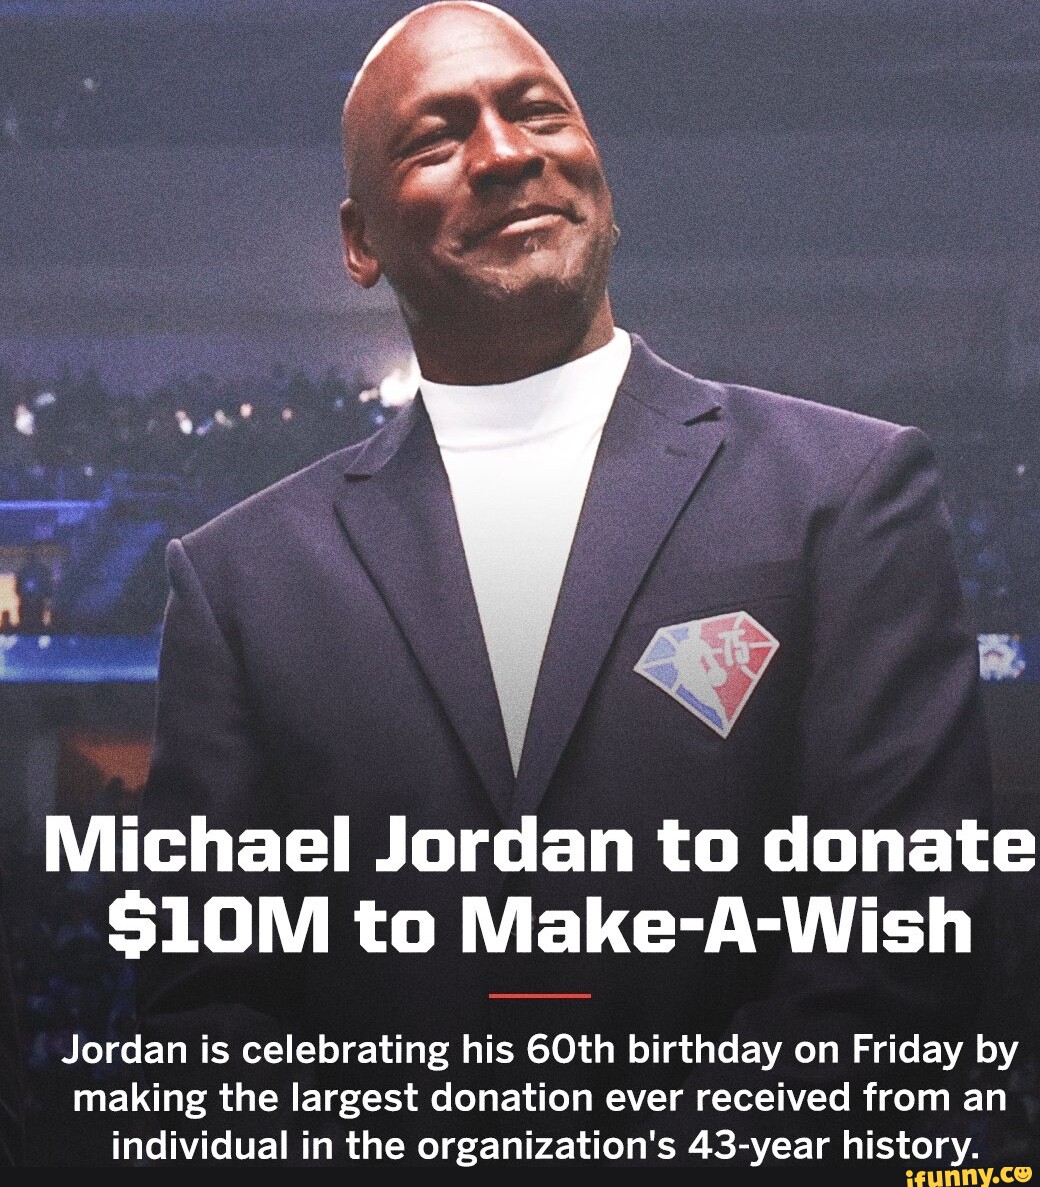 Michael Jordan to donate S10M to Make-A-Wish Jordan is celebrating his 60th birthday on Friday by making the largest donation ever received from an individual in the organization's 43-year history. - iFunny